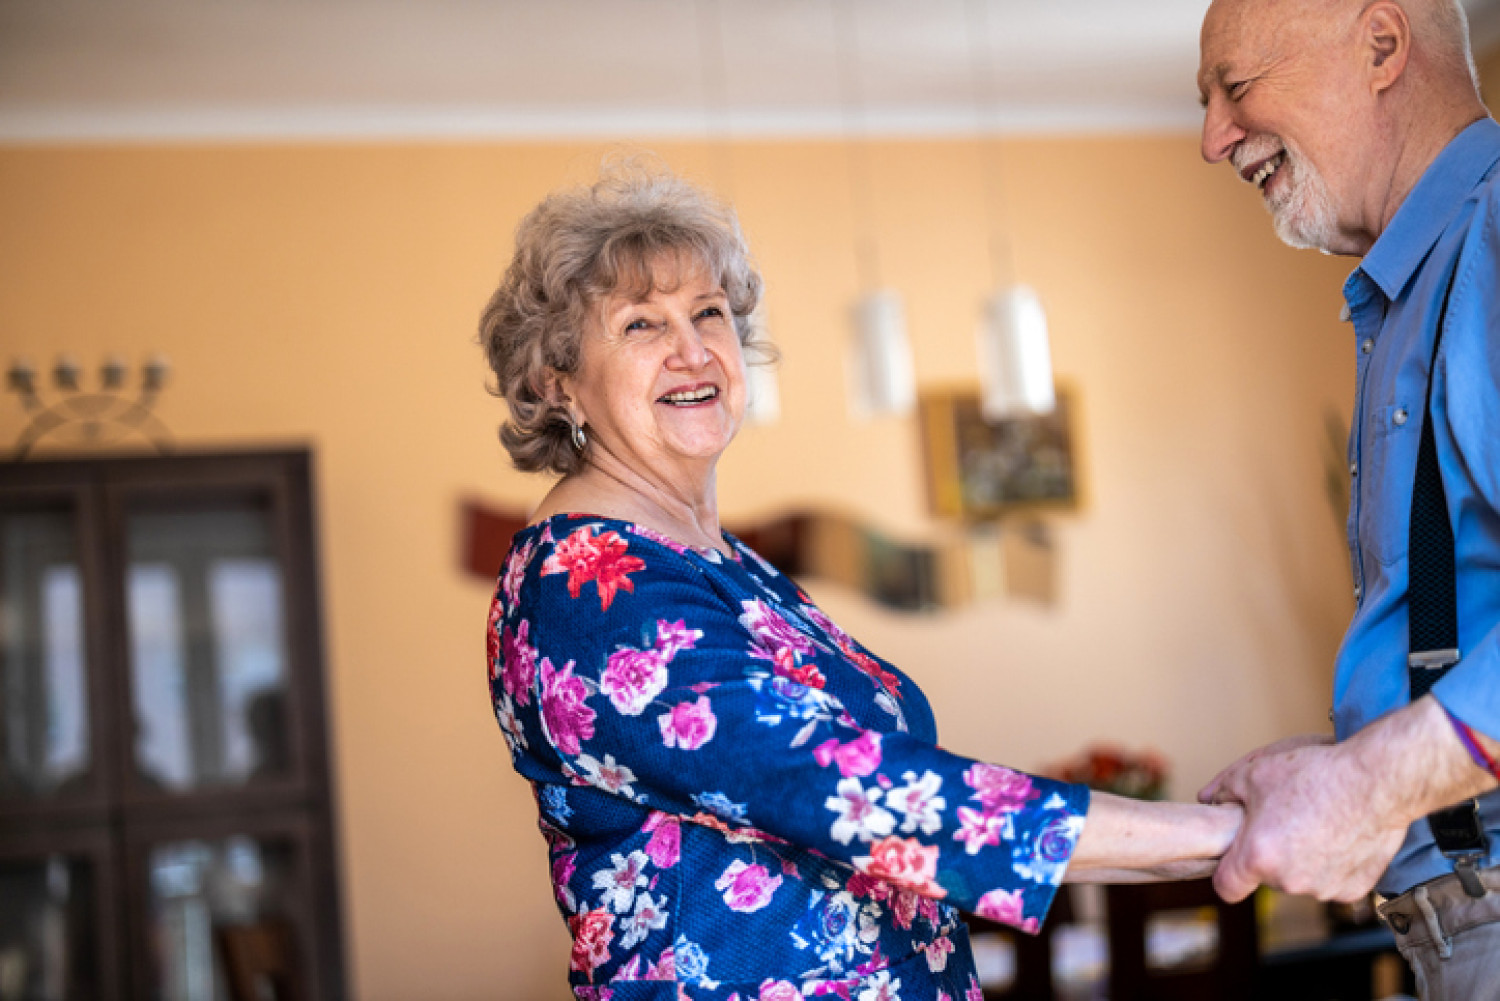 Joyful elderly couple dancing, benefiting from music therapy's social aspects.